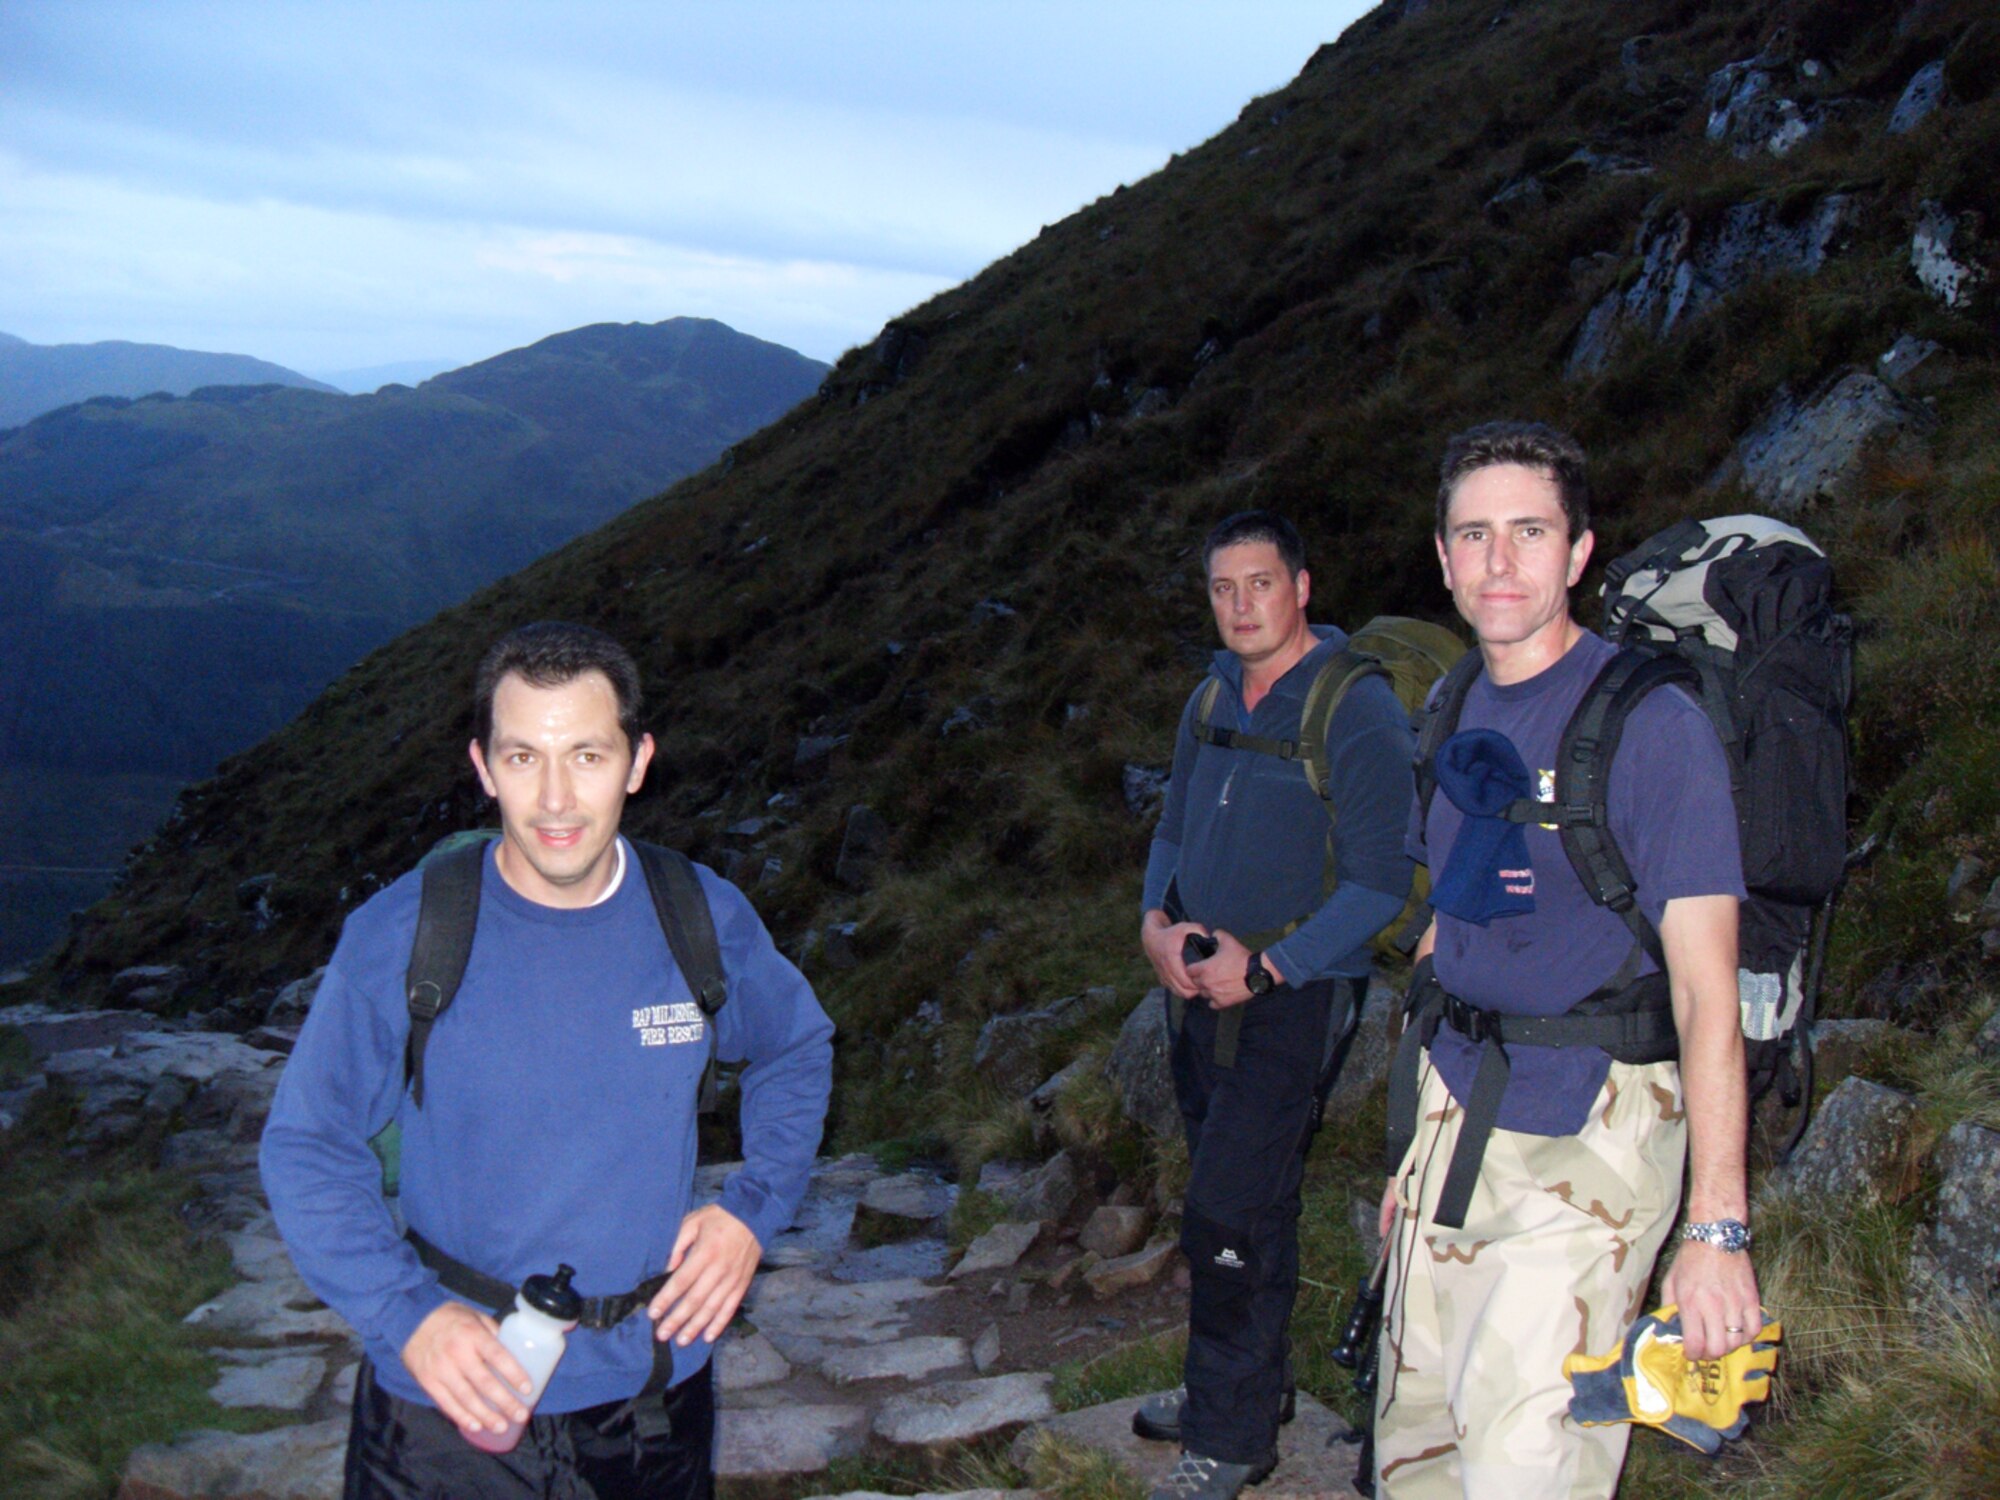 (From left to right) Defence Fire Service Firefighter Alan Coldwell, 100th Civil Engineer Squadron Fire Department, Dave Wainwright, 100th Force Support Squadron Outdoor Recreation, and Defence Fire Service Firefighter Chris Gould, also 100th CES Fire Department, pose for a photo half-way up Ben Nevis, Scotland. Ben Nevis was the first of three mountains they climbed Oct. 2 and 3 for the Three Peaks Challenge, to raise money for charity. The men also climbed Scaffel Pike, England, and Mount Snowdon, Wales. At the top of Mount Snowdon, where they finished their original challenge, they found a new challenge when they came across a man who was unconscious and suffering from hypothermia and frostbite. They called emergency services and played a big part in getting him rescued from the mountain and taken to the hospital. ((Photo by Firefighter Jerry Myles)